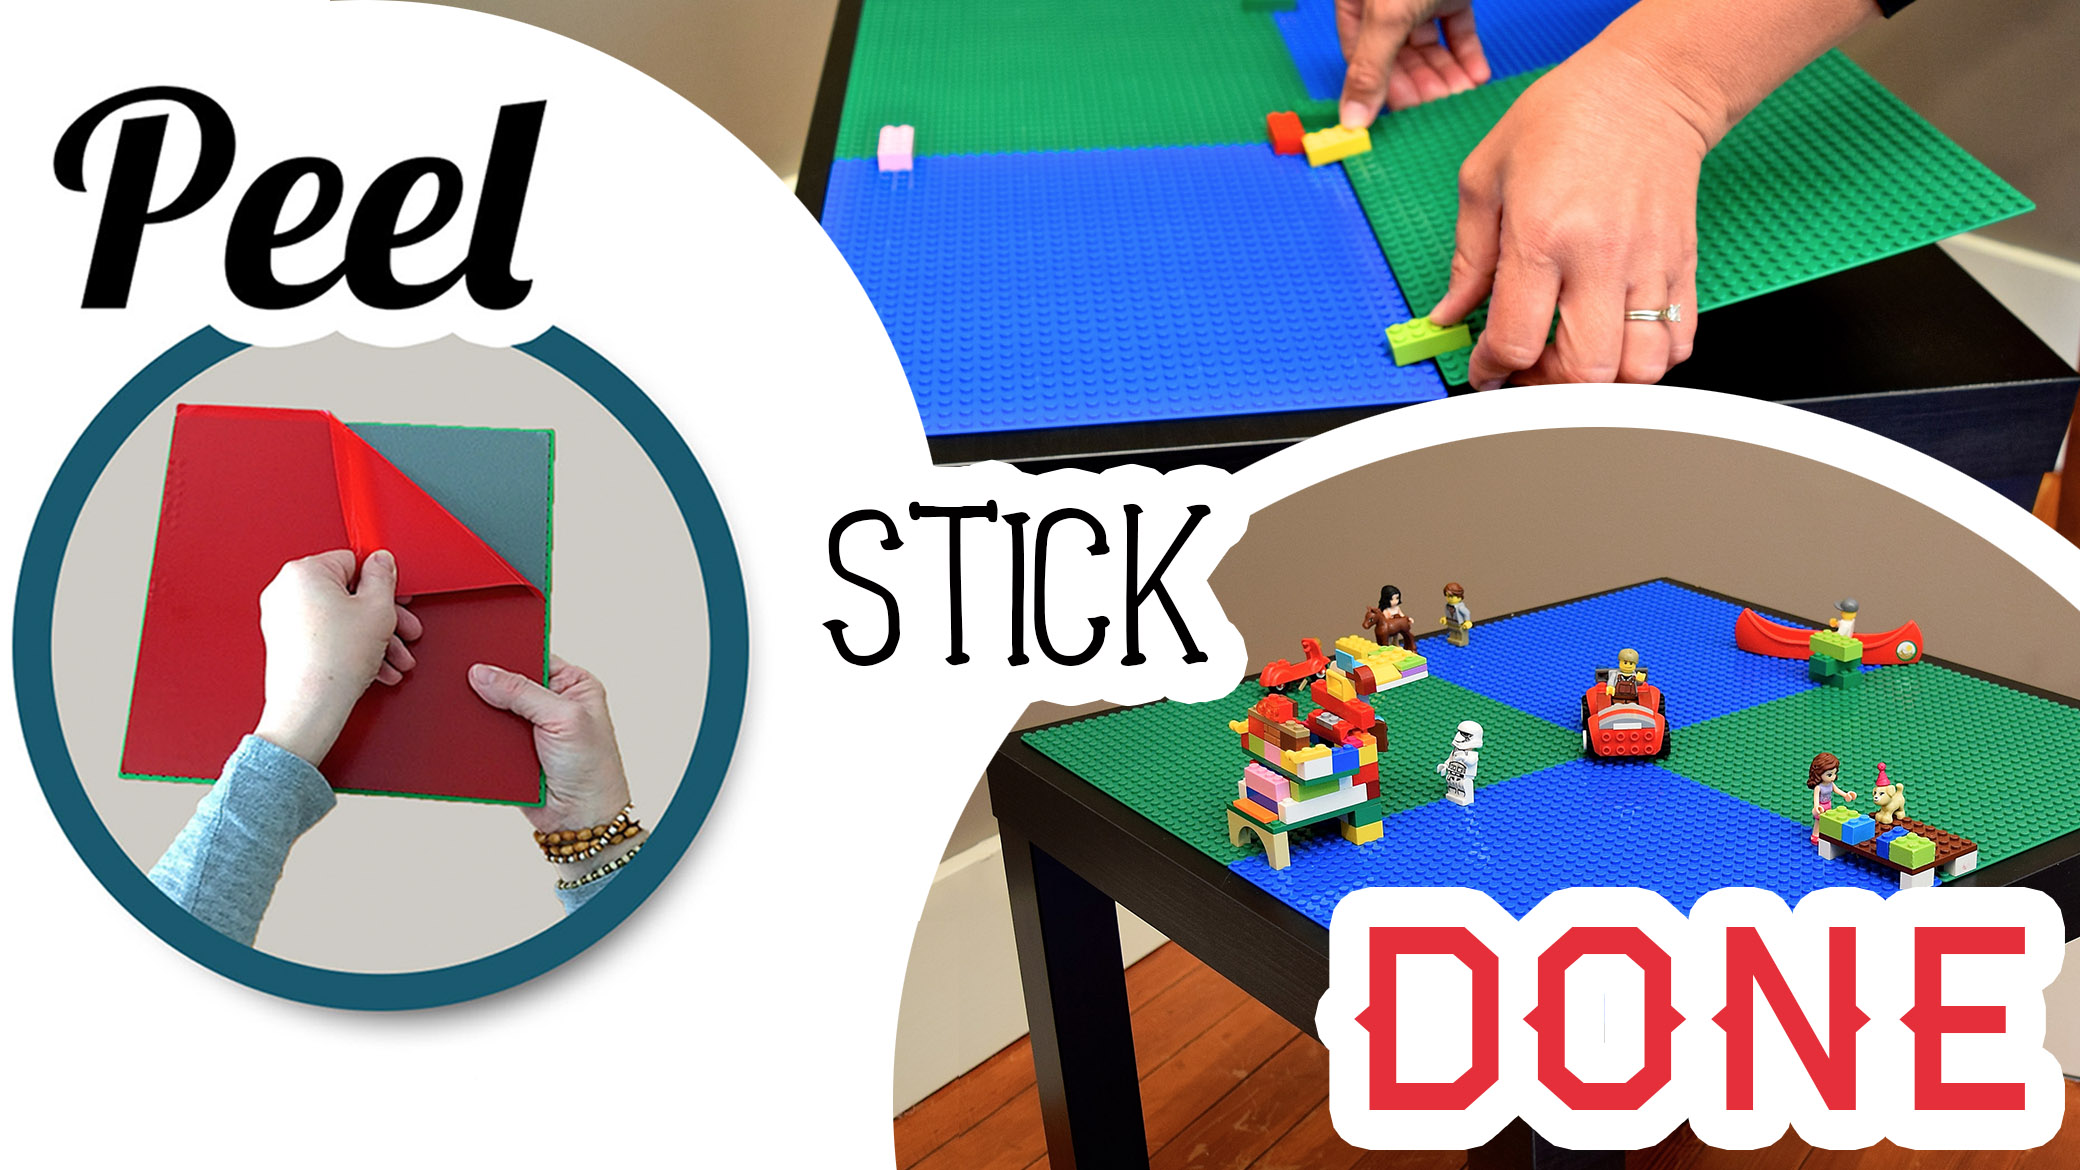 Making a LEGO-compatible table is as easy as peel, stick, done.